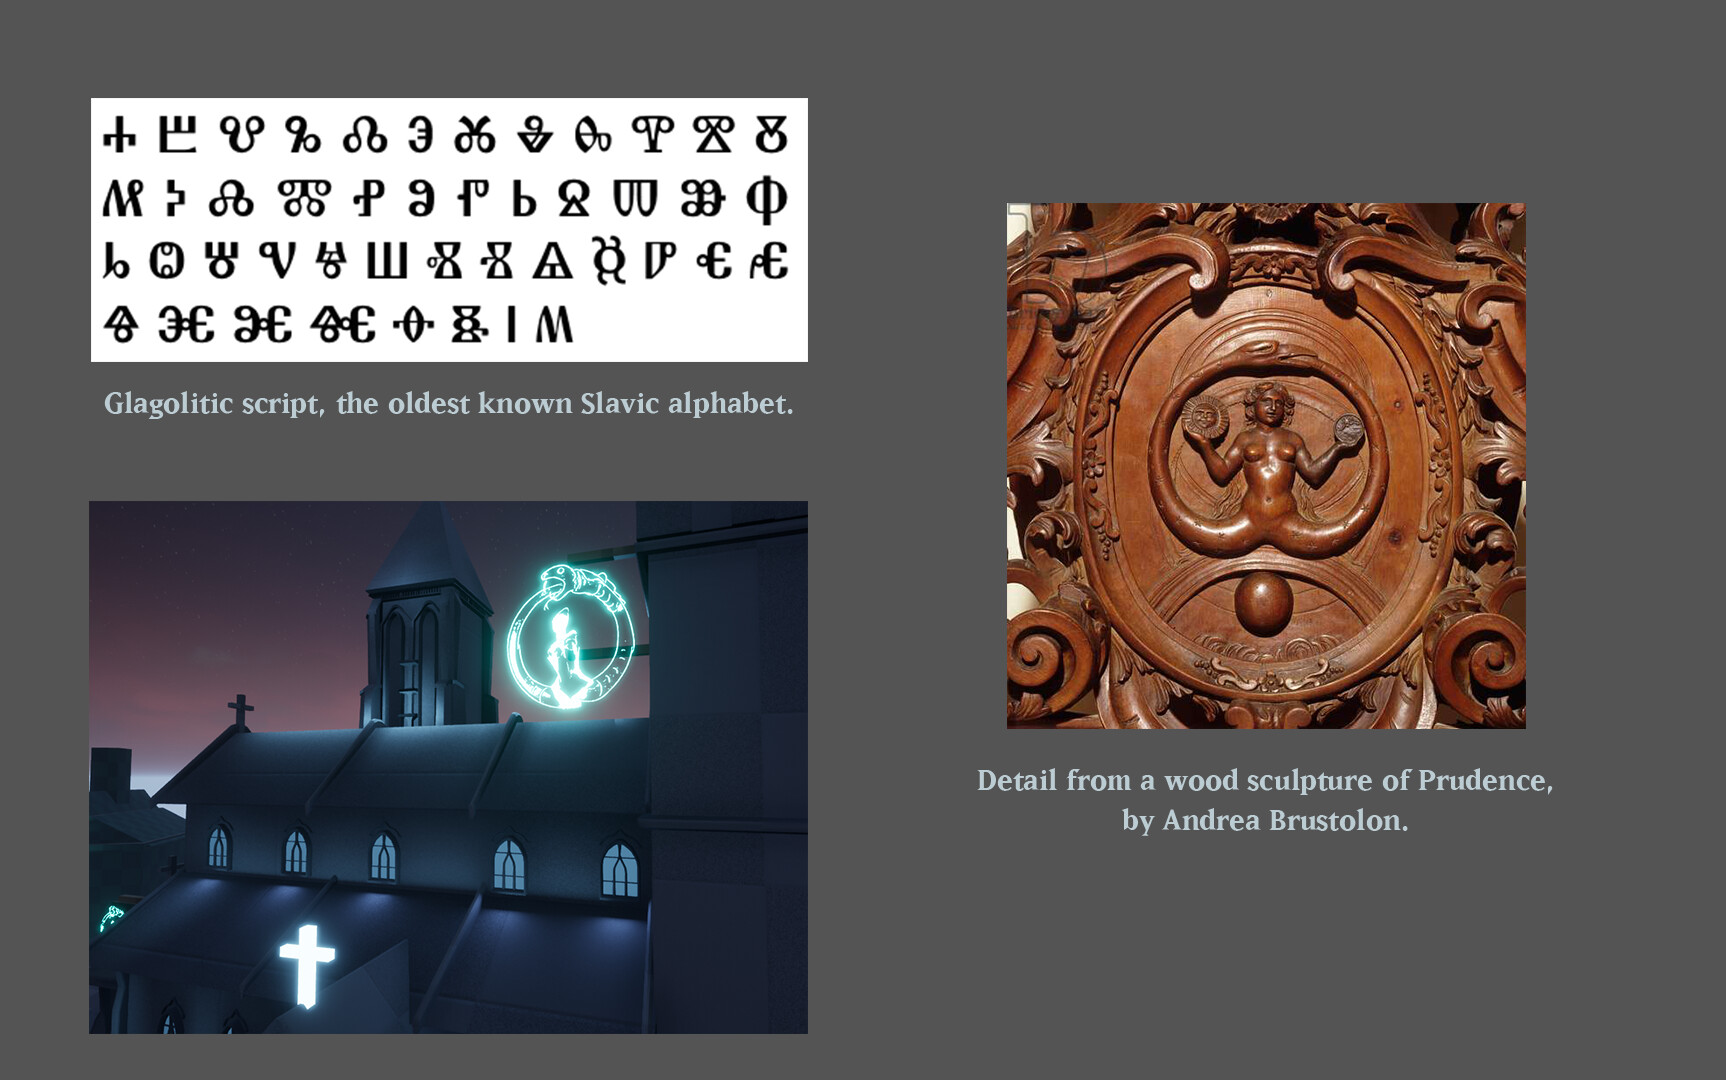 To the top left is a screenshot of the Glagolitic script, the oldest known Slavic alphabet. Below it is a screenshot from the cathedral, zoomed in. To the right of those two is a detail from a wood sculpture of Prudence, by Andrea Brustolon.